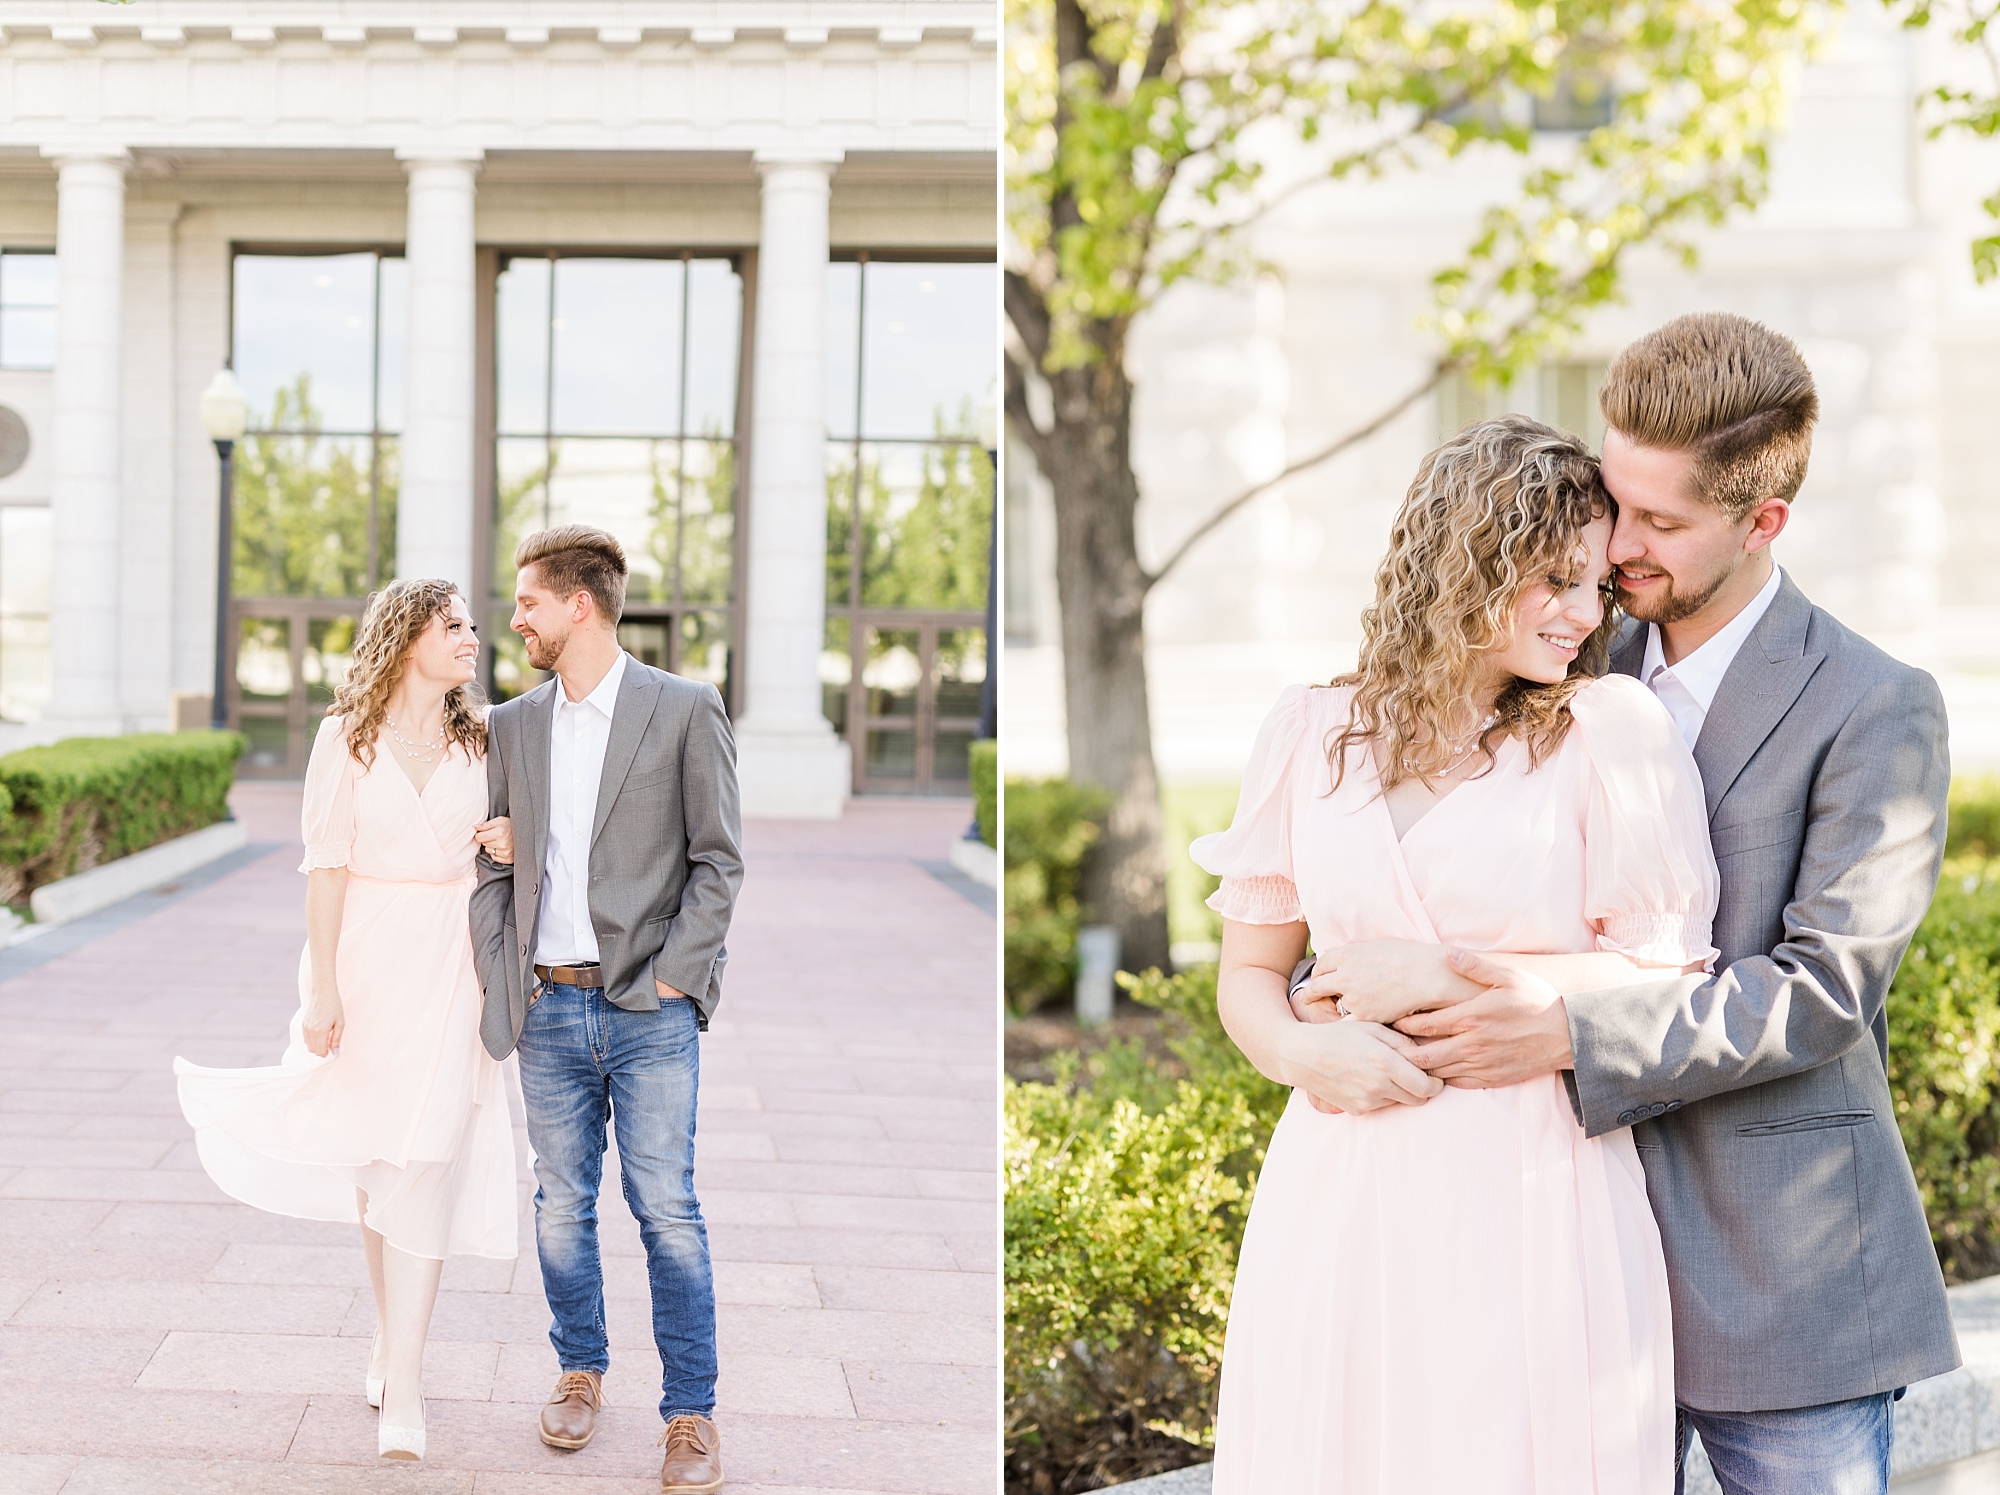 Spring engagements at the Utah State Capitol